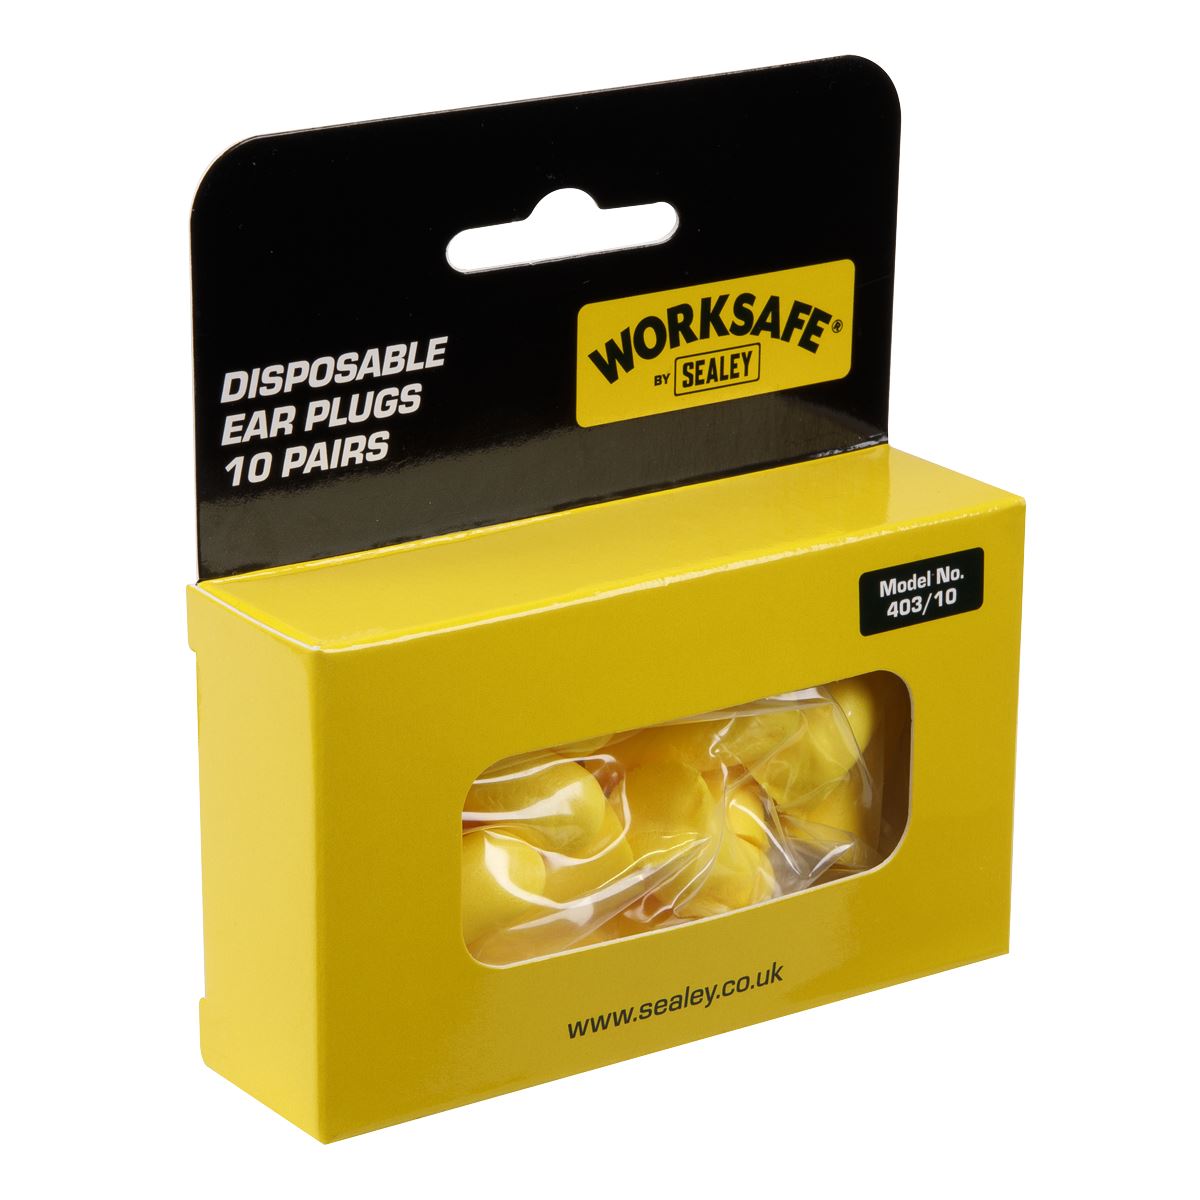 Worksafe by Sealey Ear Plugs Disposable - 10 Pairs